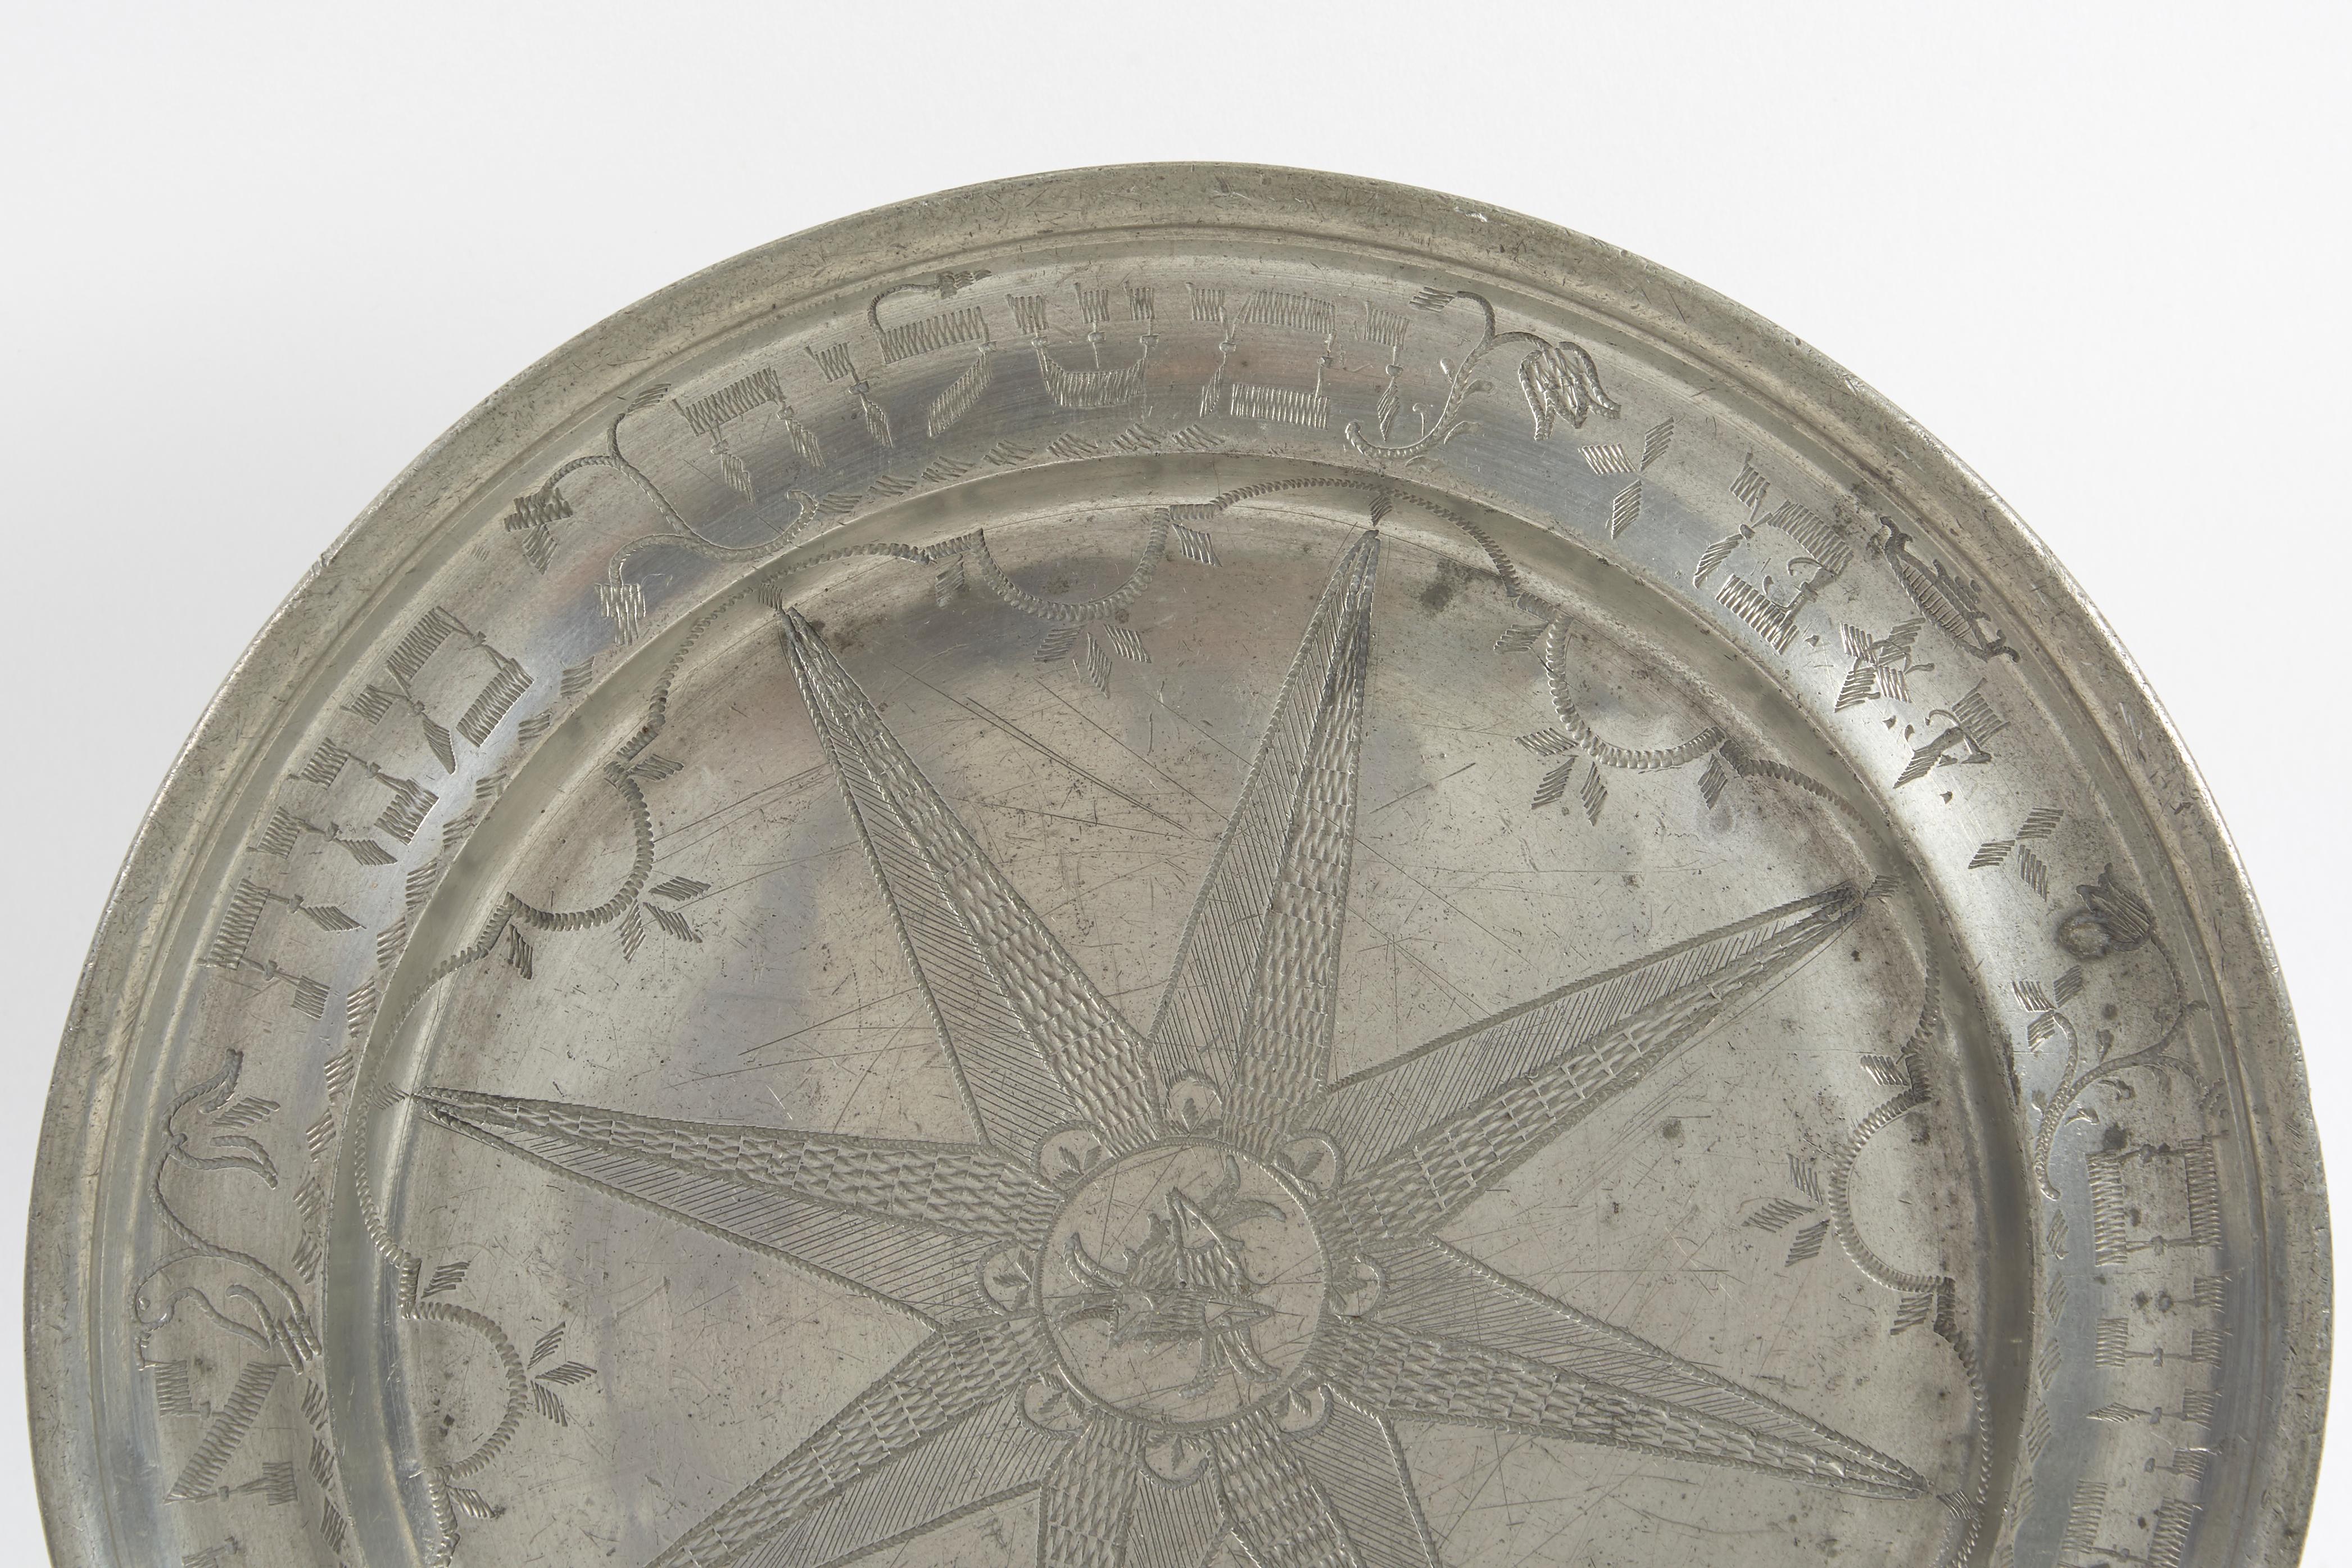 Pewter Purim dish, Germany, late 18th century.
The outer rim has wriggle-work engraving stating “and of sending portions one to another and gifts to the poor” (Esther 9:22). Interspersed between some of the words are depictions of foliage and